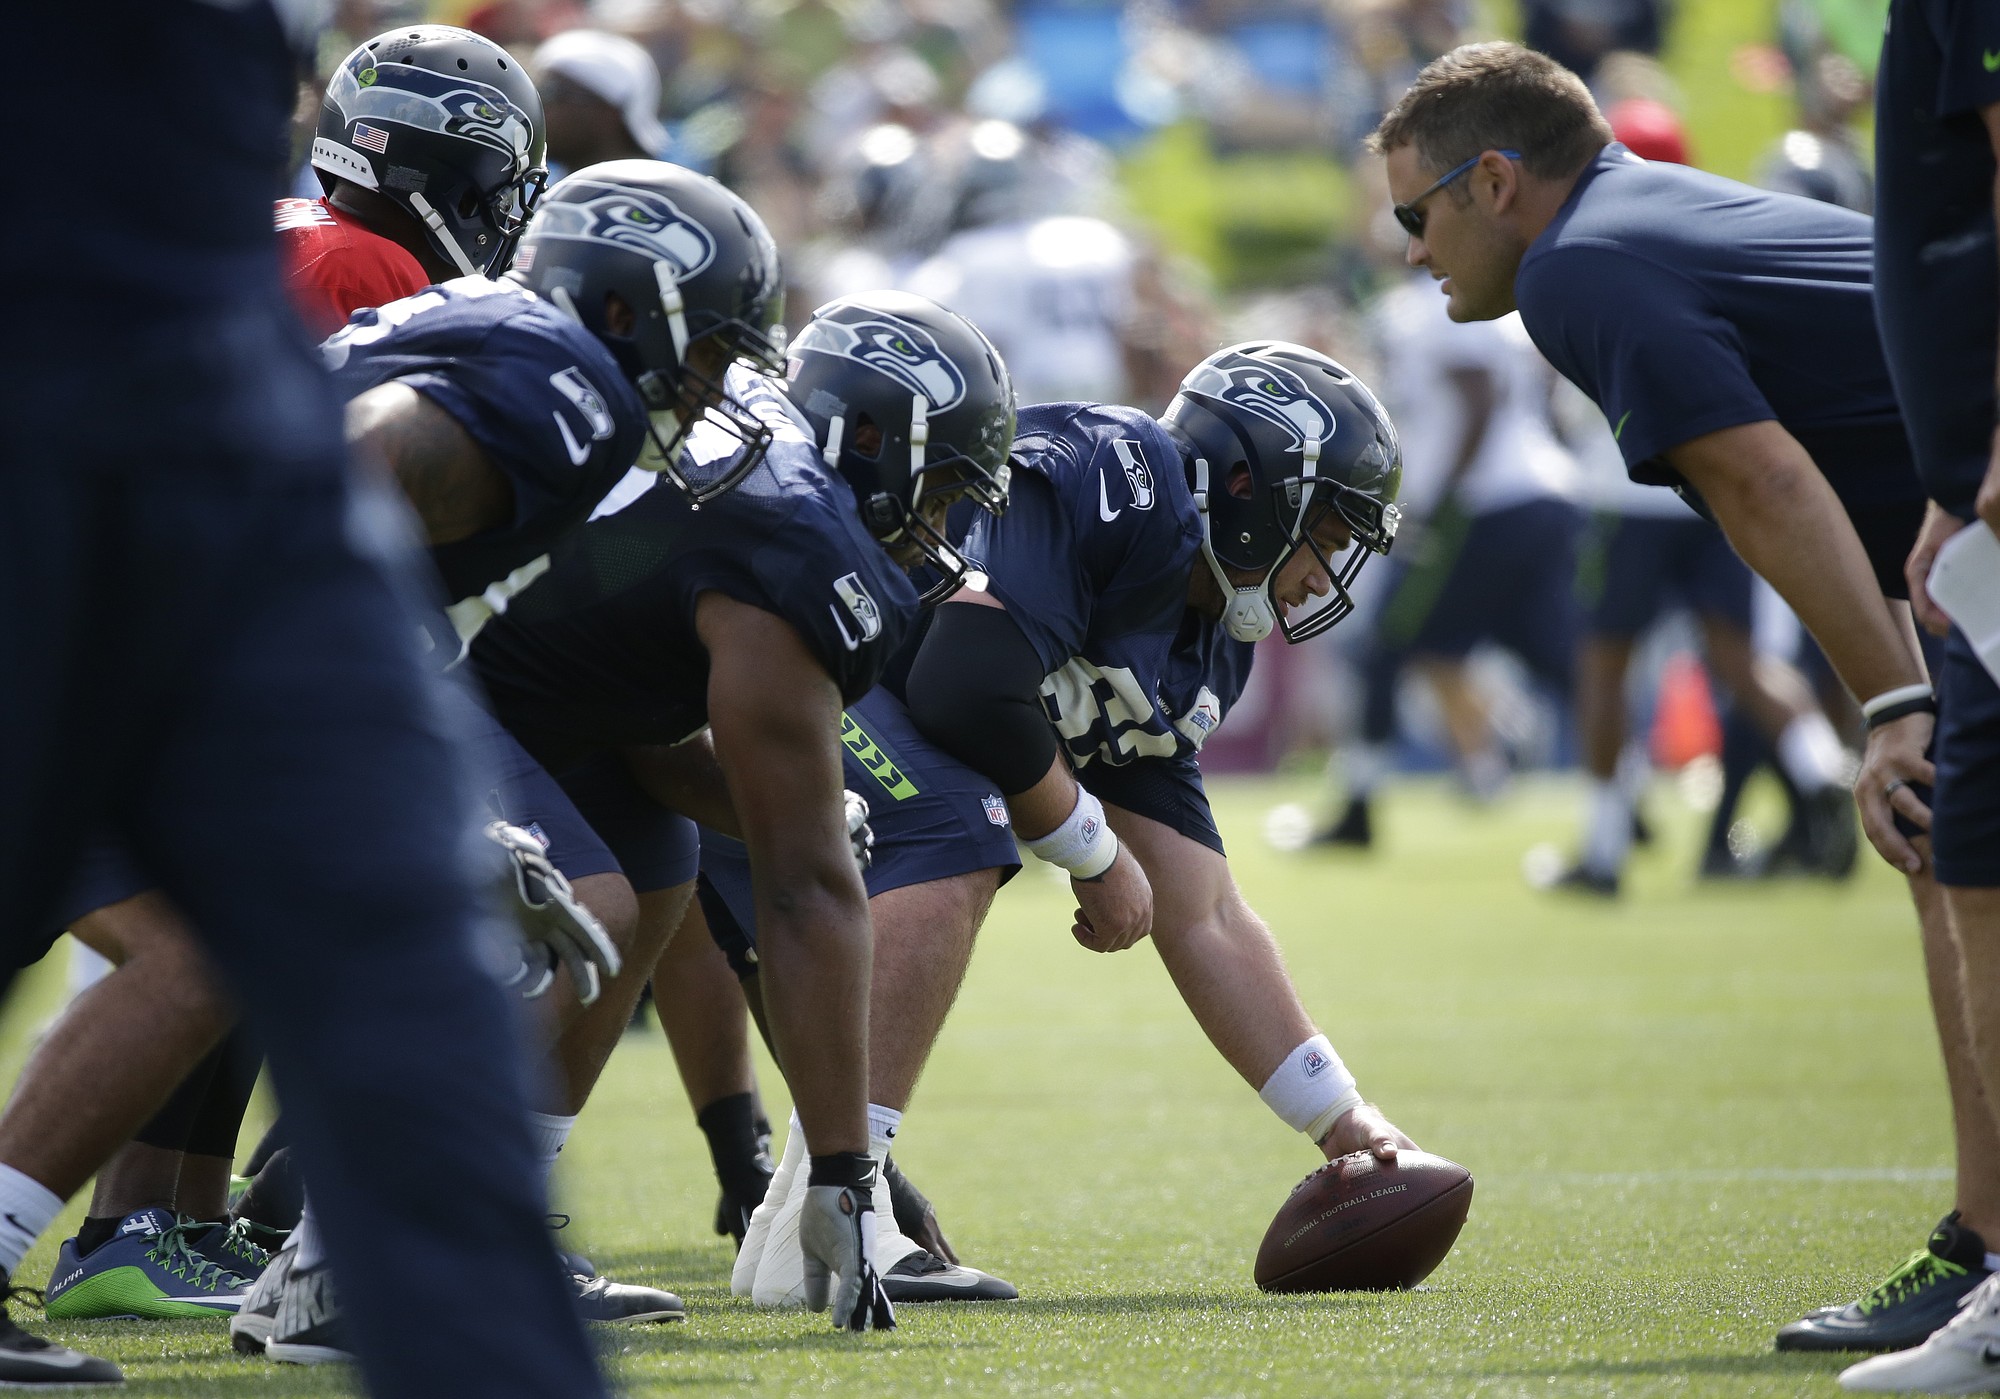 Seattle Seahawks center Drew Nowak gets ready to snap the ball during training camp Thursday, Aug. 6, 2015, in Renton.